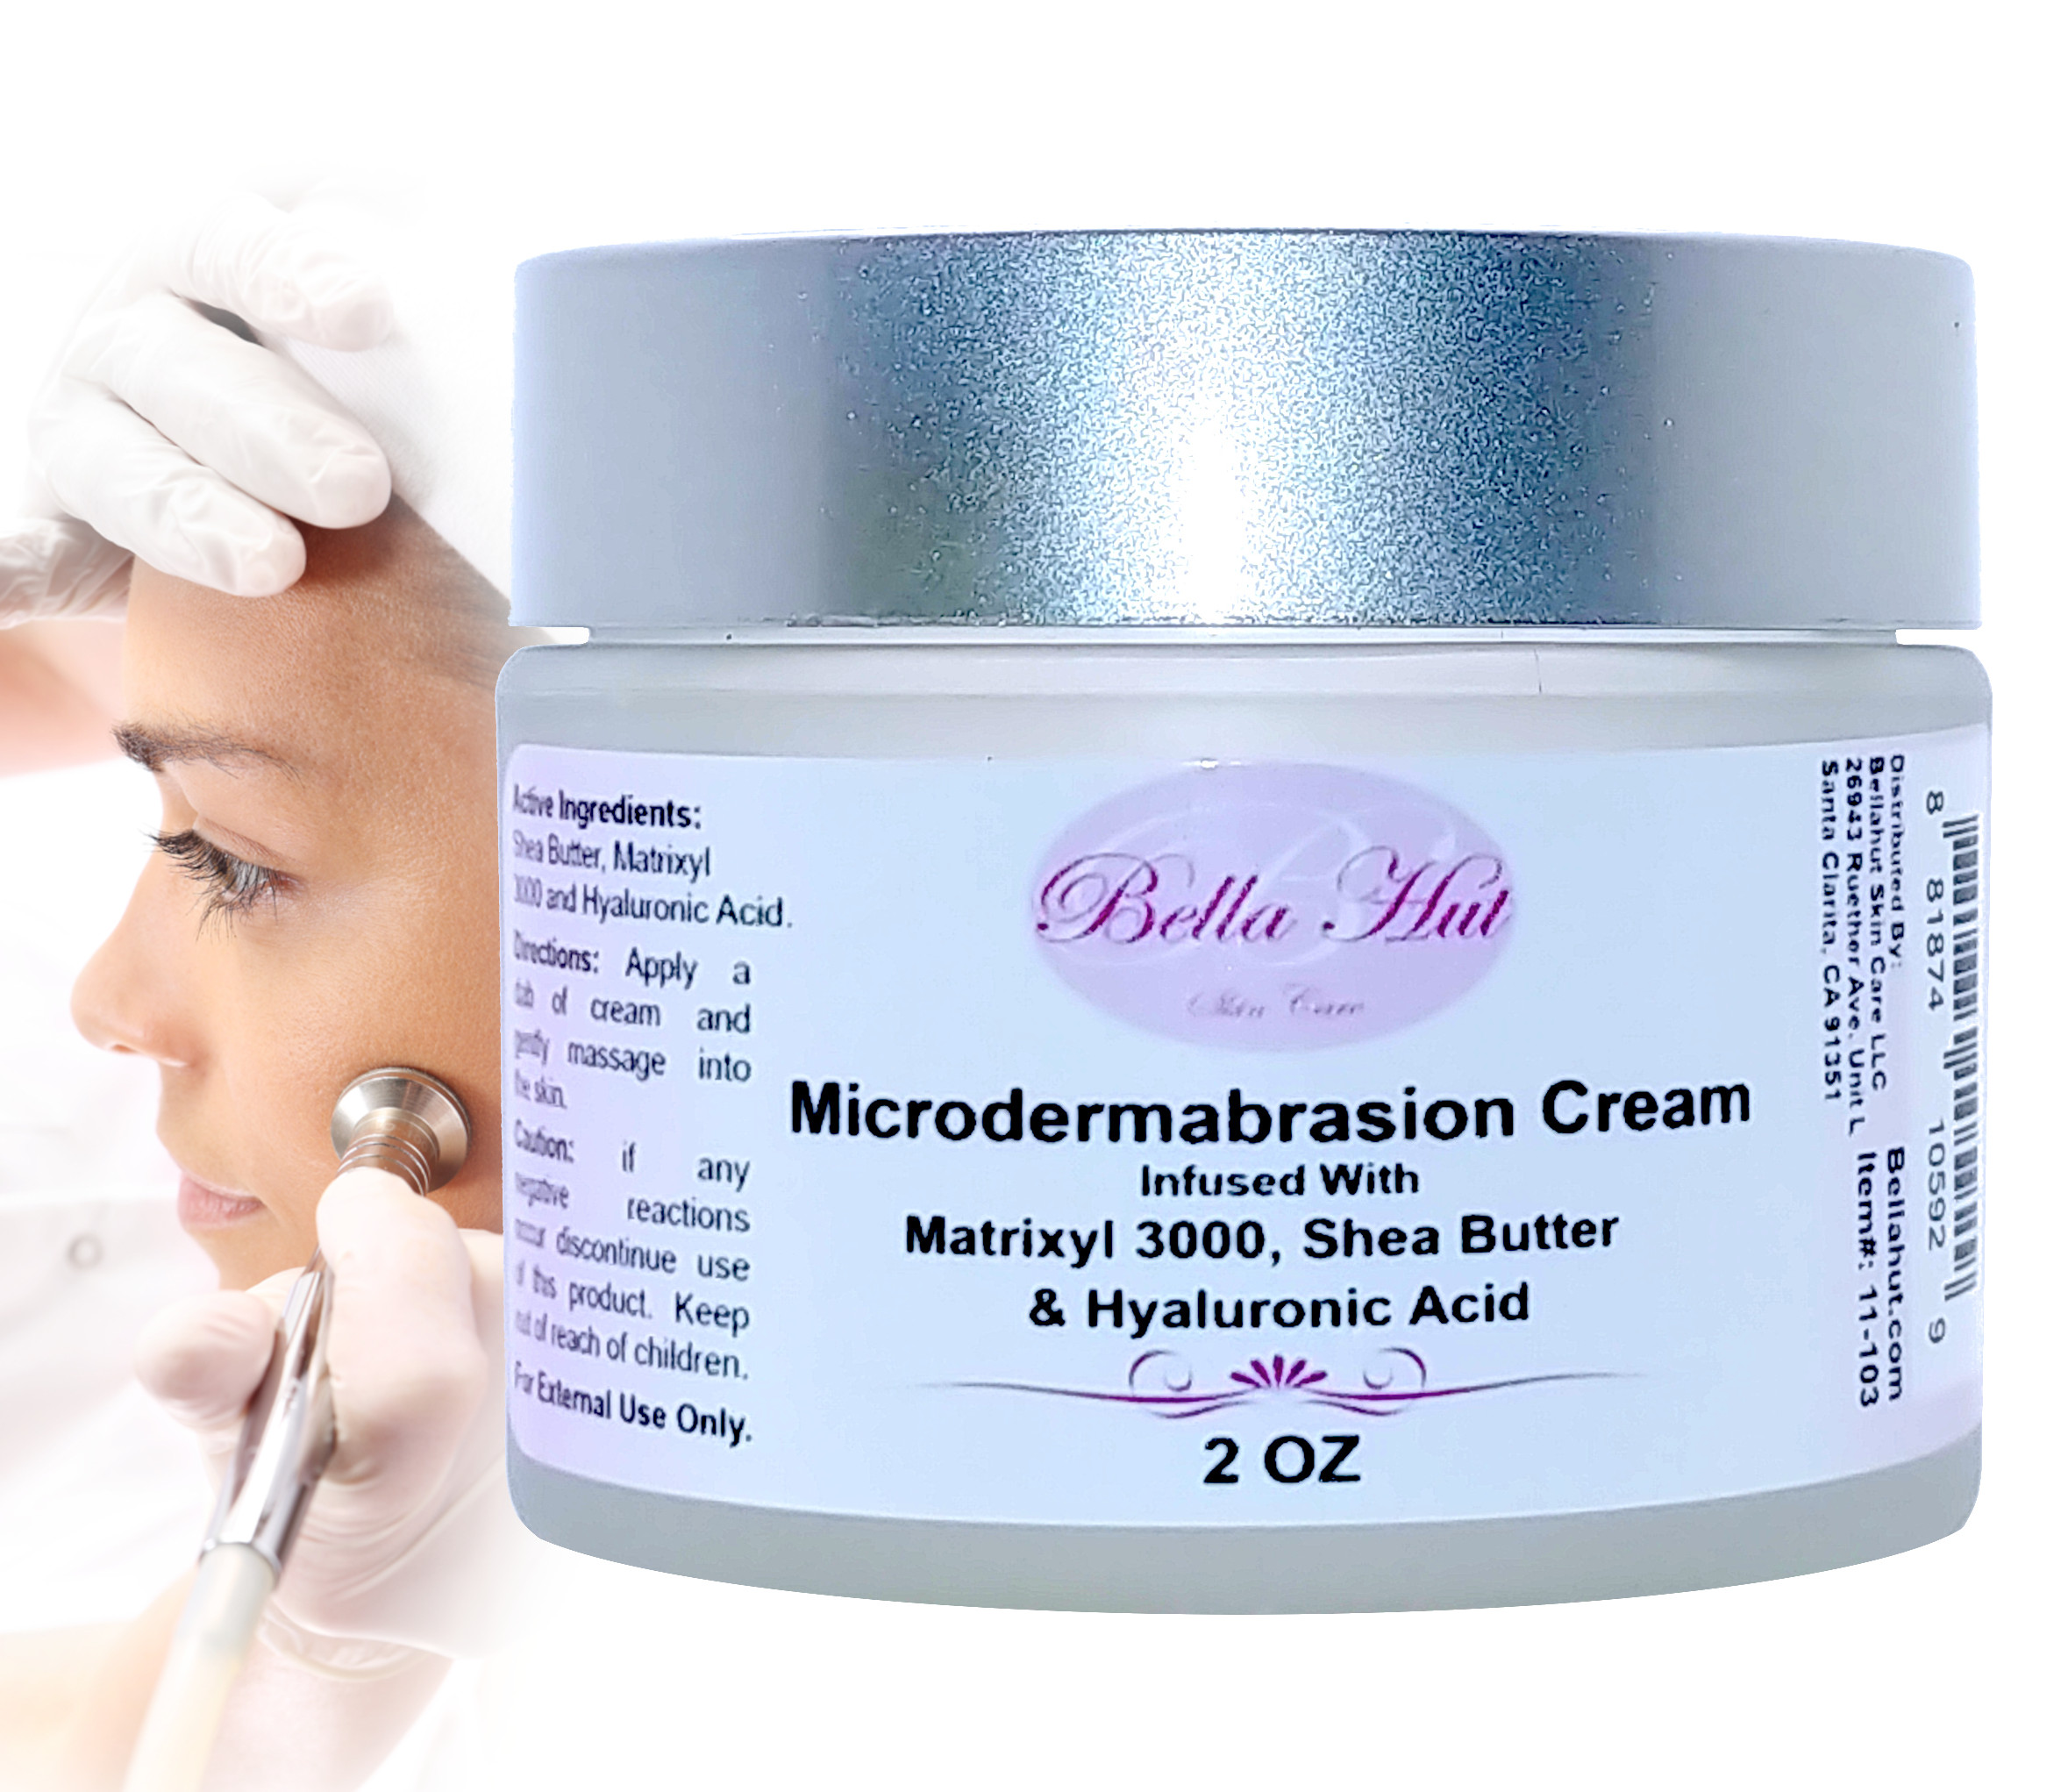 Anti Aging Cream with Hyaluronic Acid, Matrixyl 3000 And Shea Butter